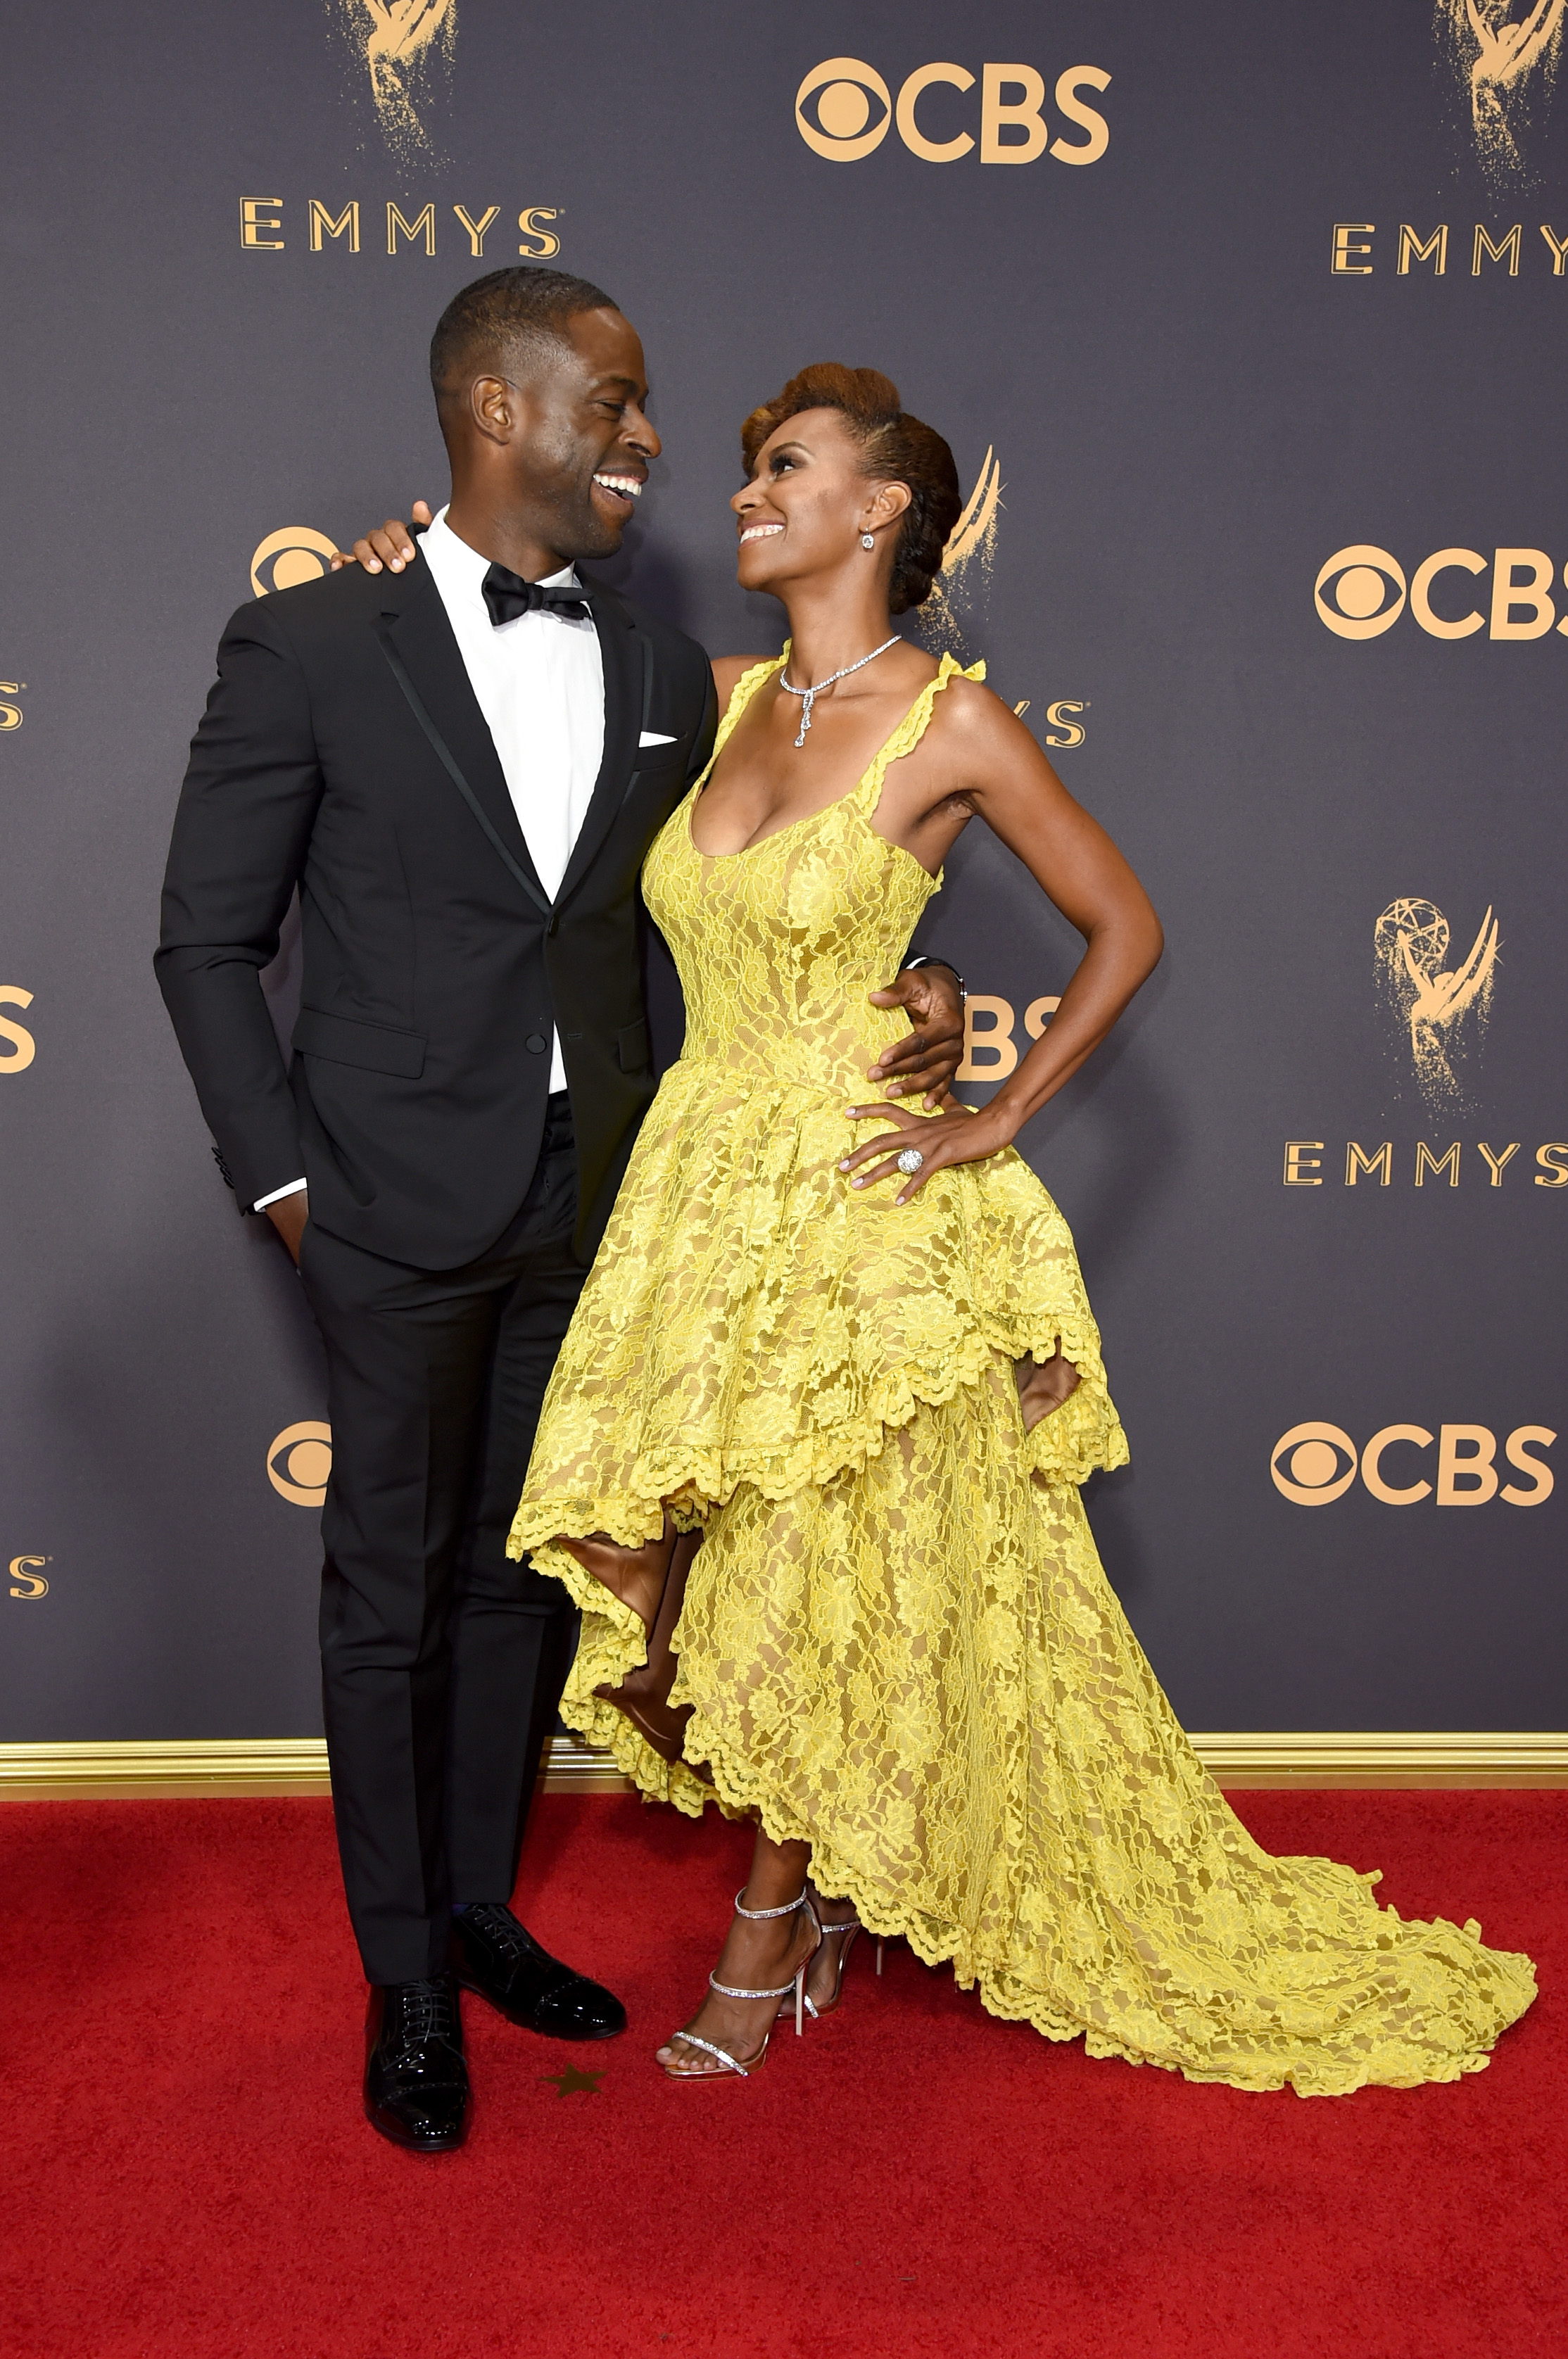 Sterling K. Brown and Ryan Michelle Bathe attend the 69th Annual Primetime Emmy Awards at Microsoft Theater on Sept. 17, 2017 in Los Angeles.